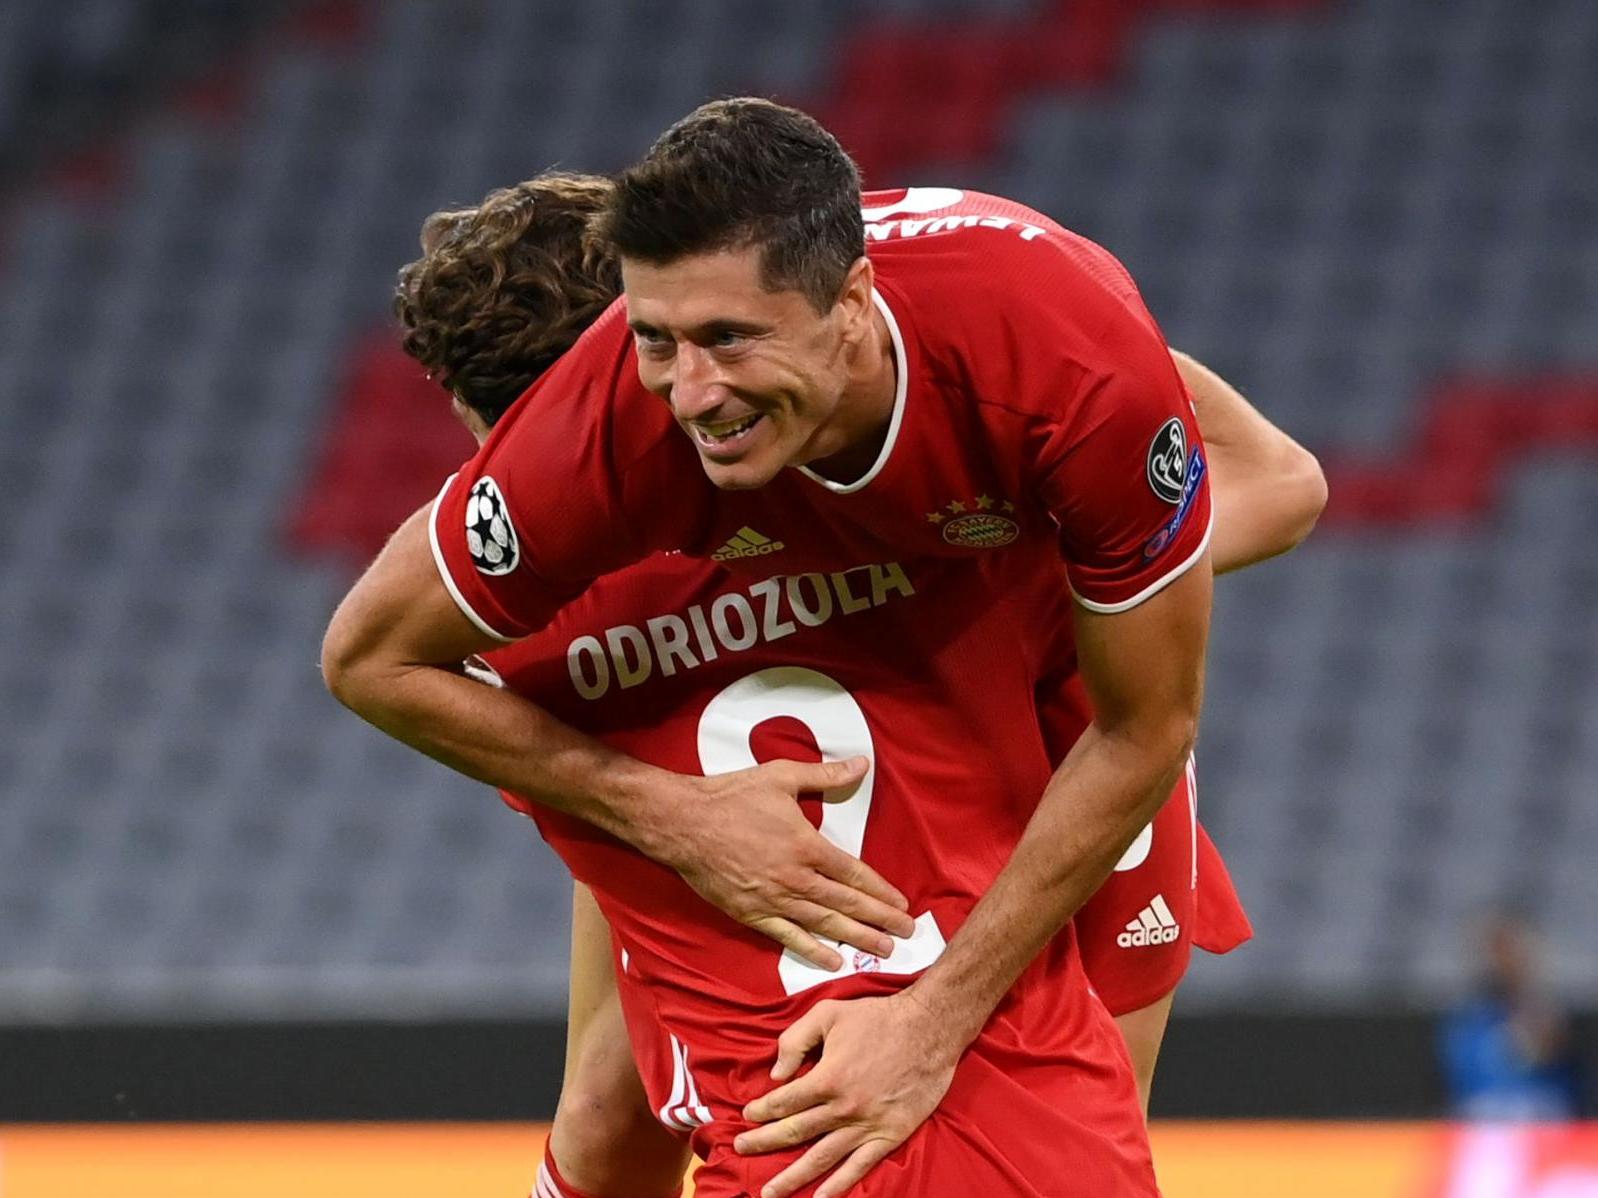 Bayern Munich prove too good as Chelsea bow out of Champions League